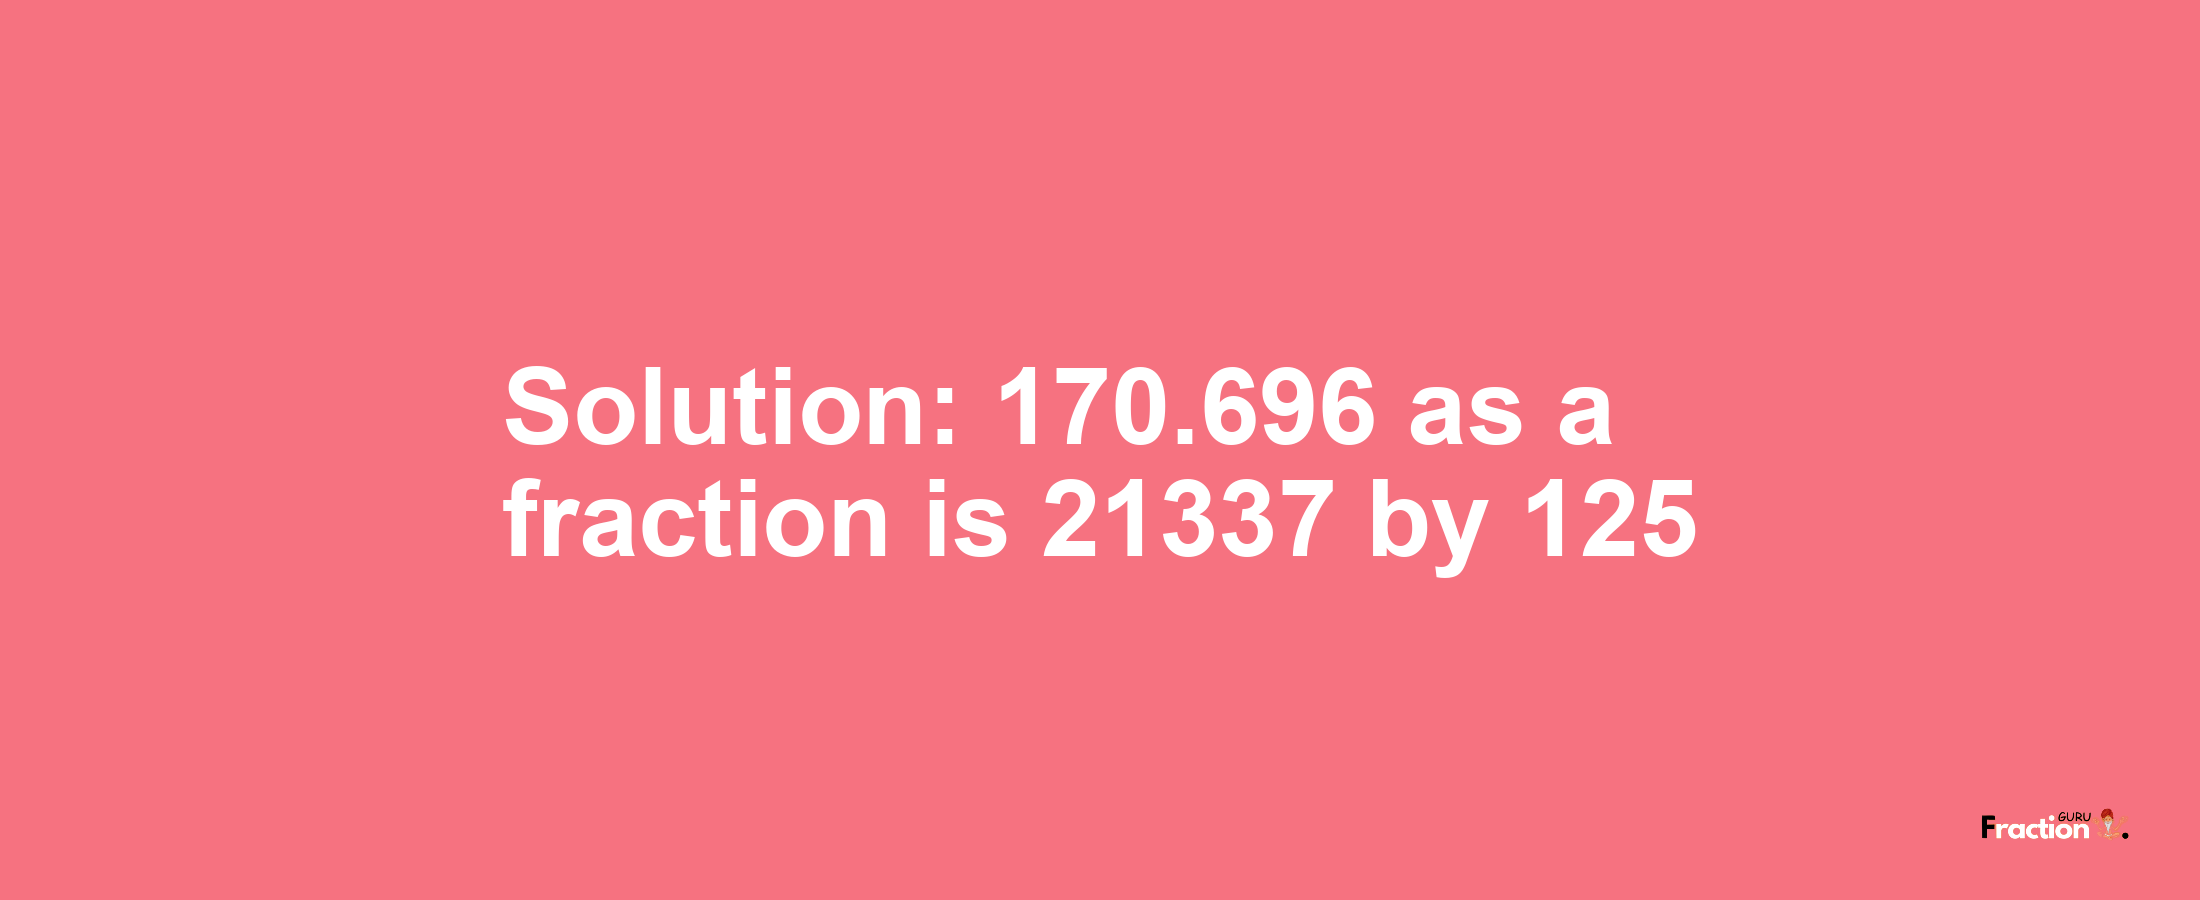 Solution:170.696 as a fraction is 21337/125